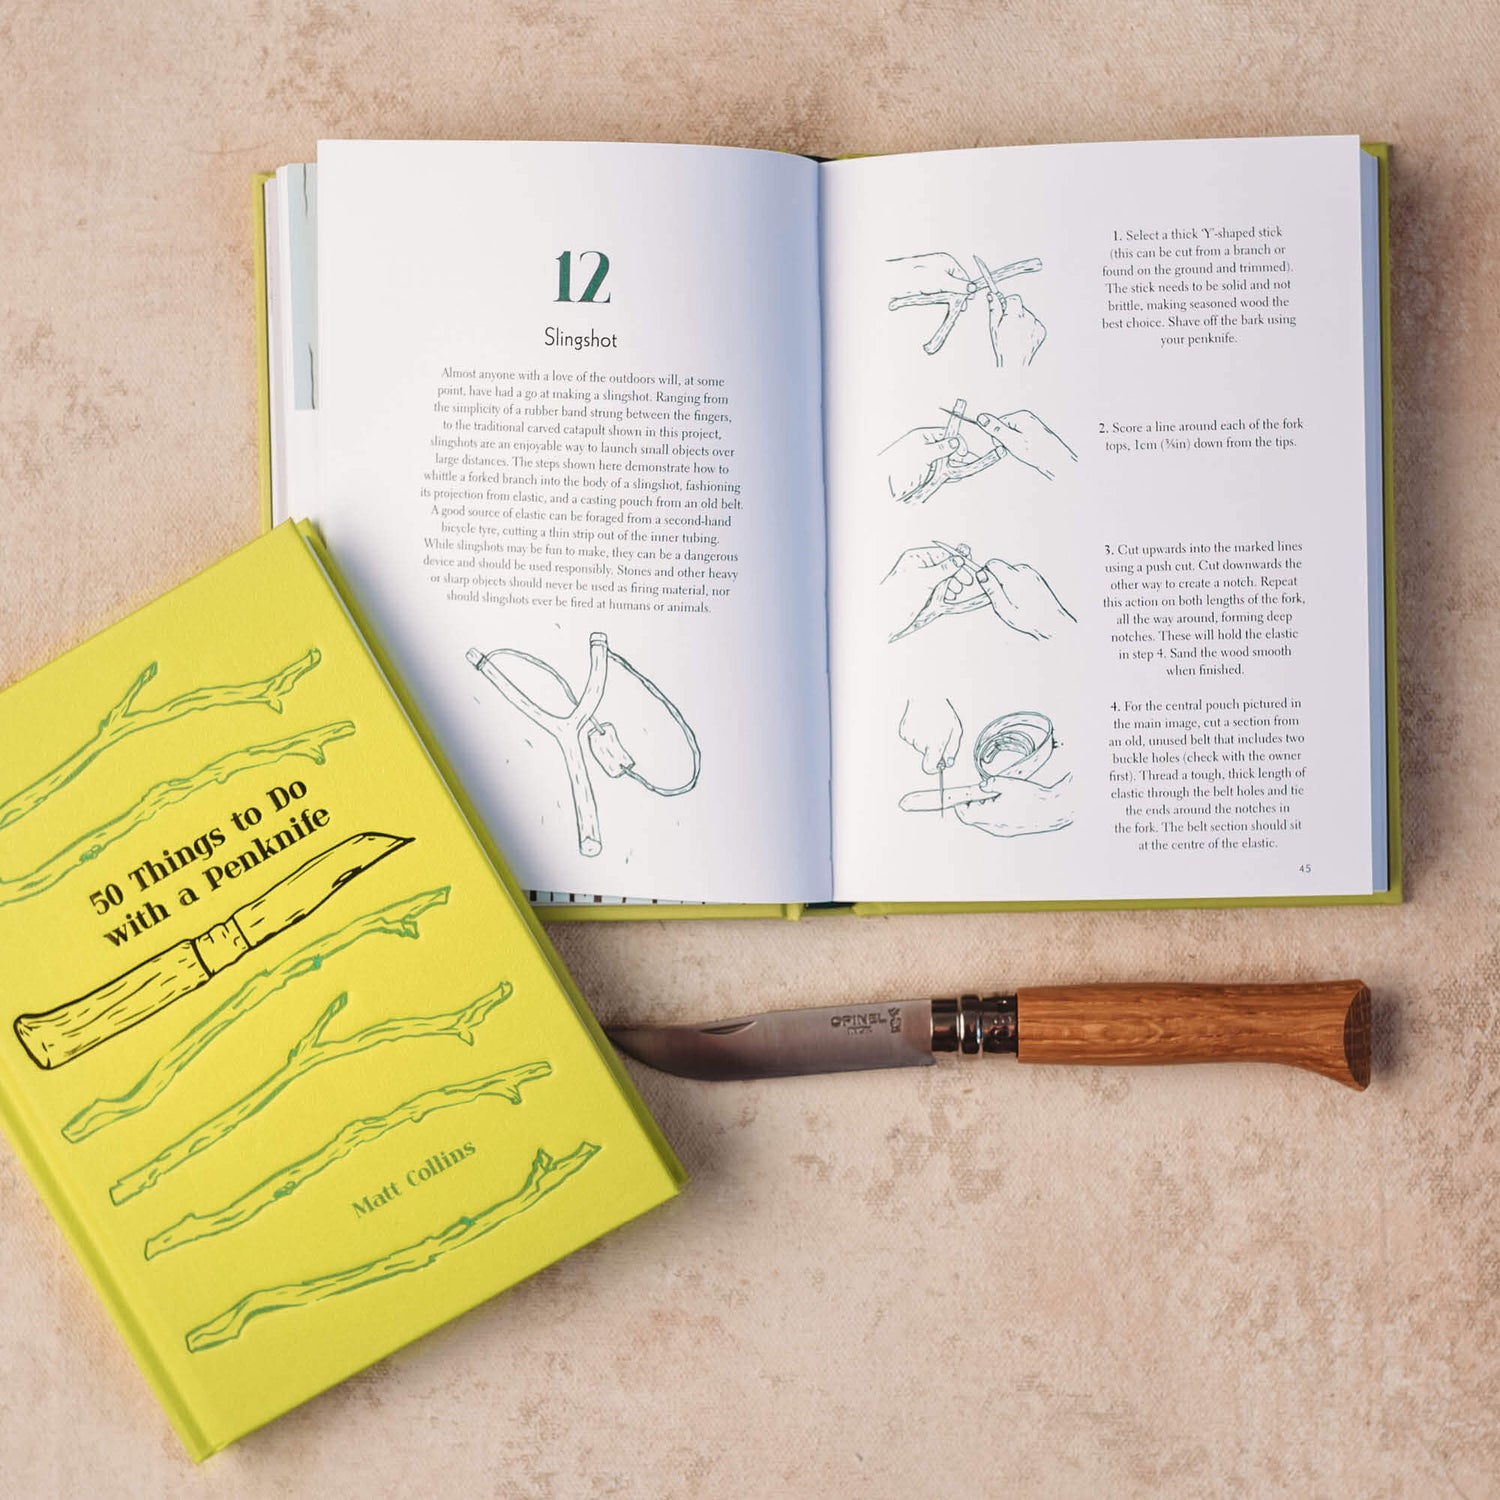 Open page showing how to whittle a slingshot using 50 Things to do with a Penknife book by Matt Collins with advanced No08 wood whittling knife by Opinel, sold by Your Wild Books in a bundle for 13% off